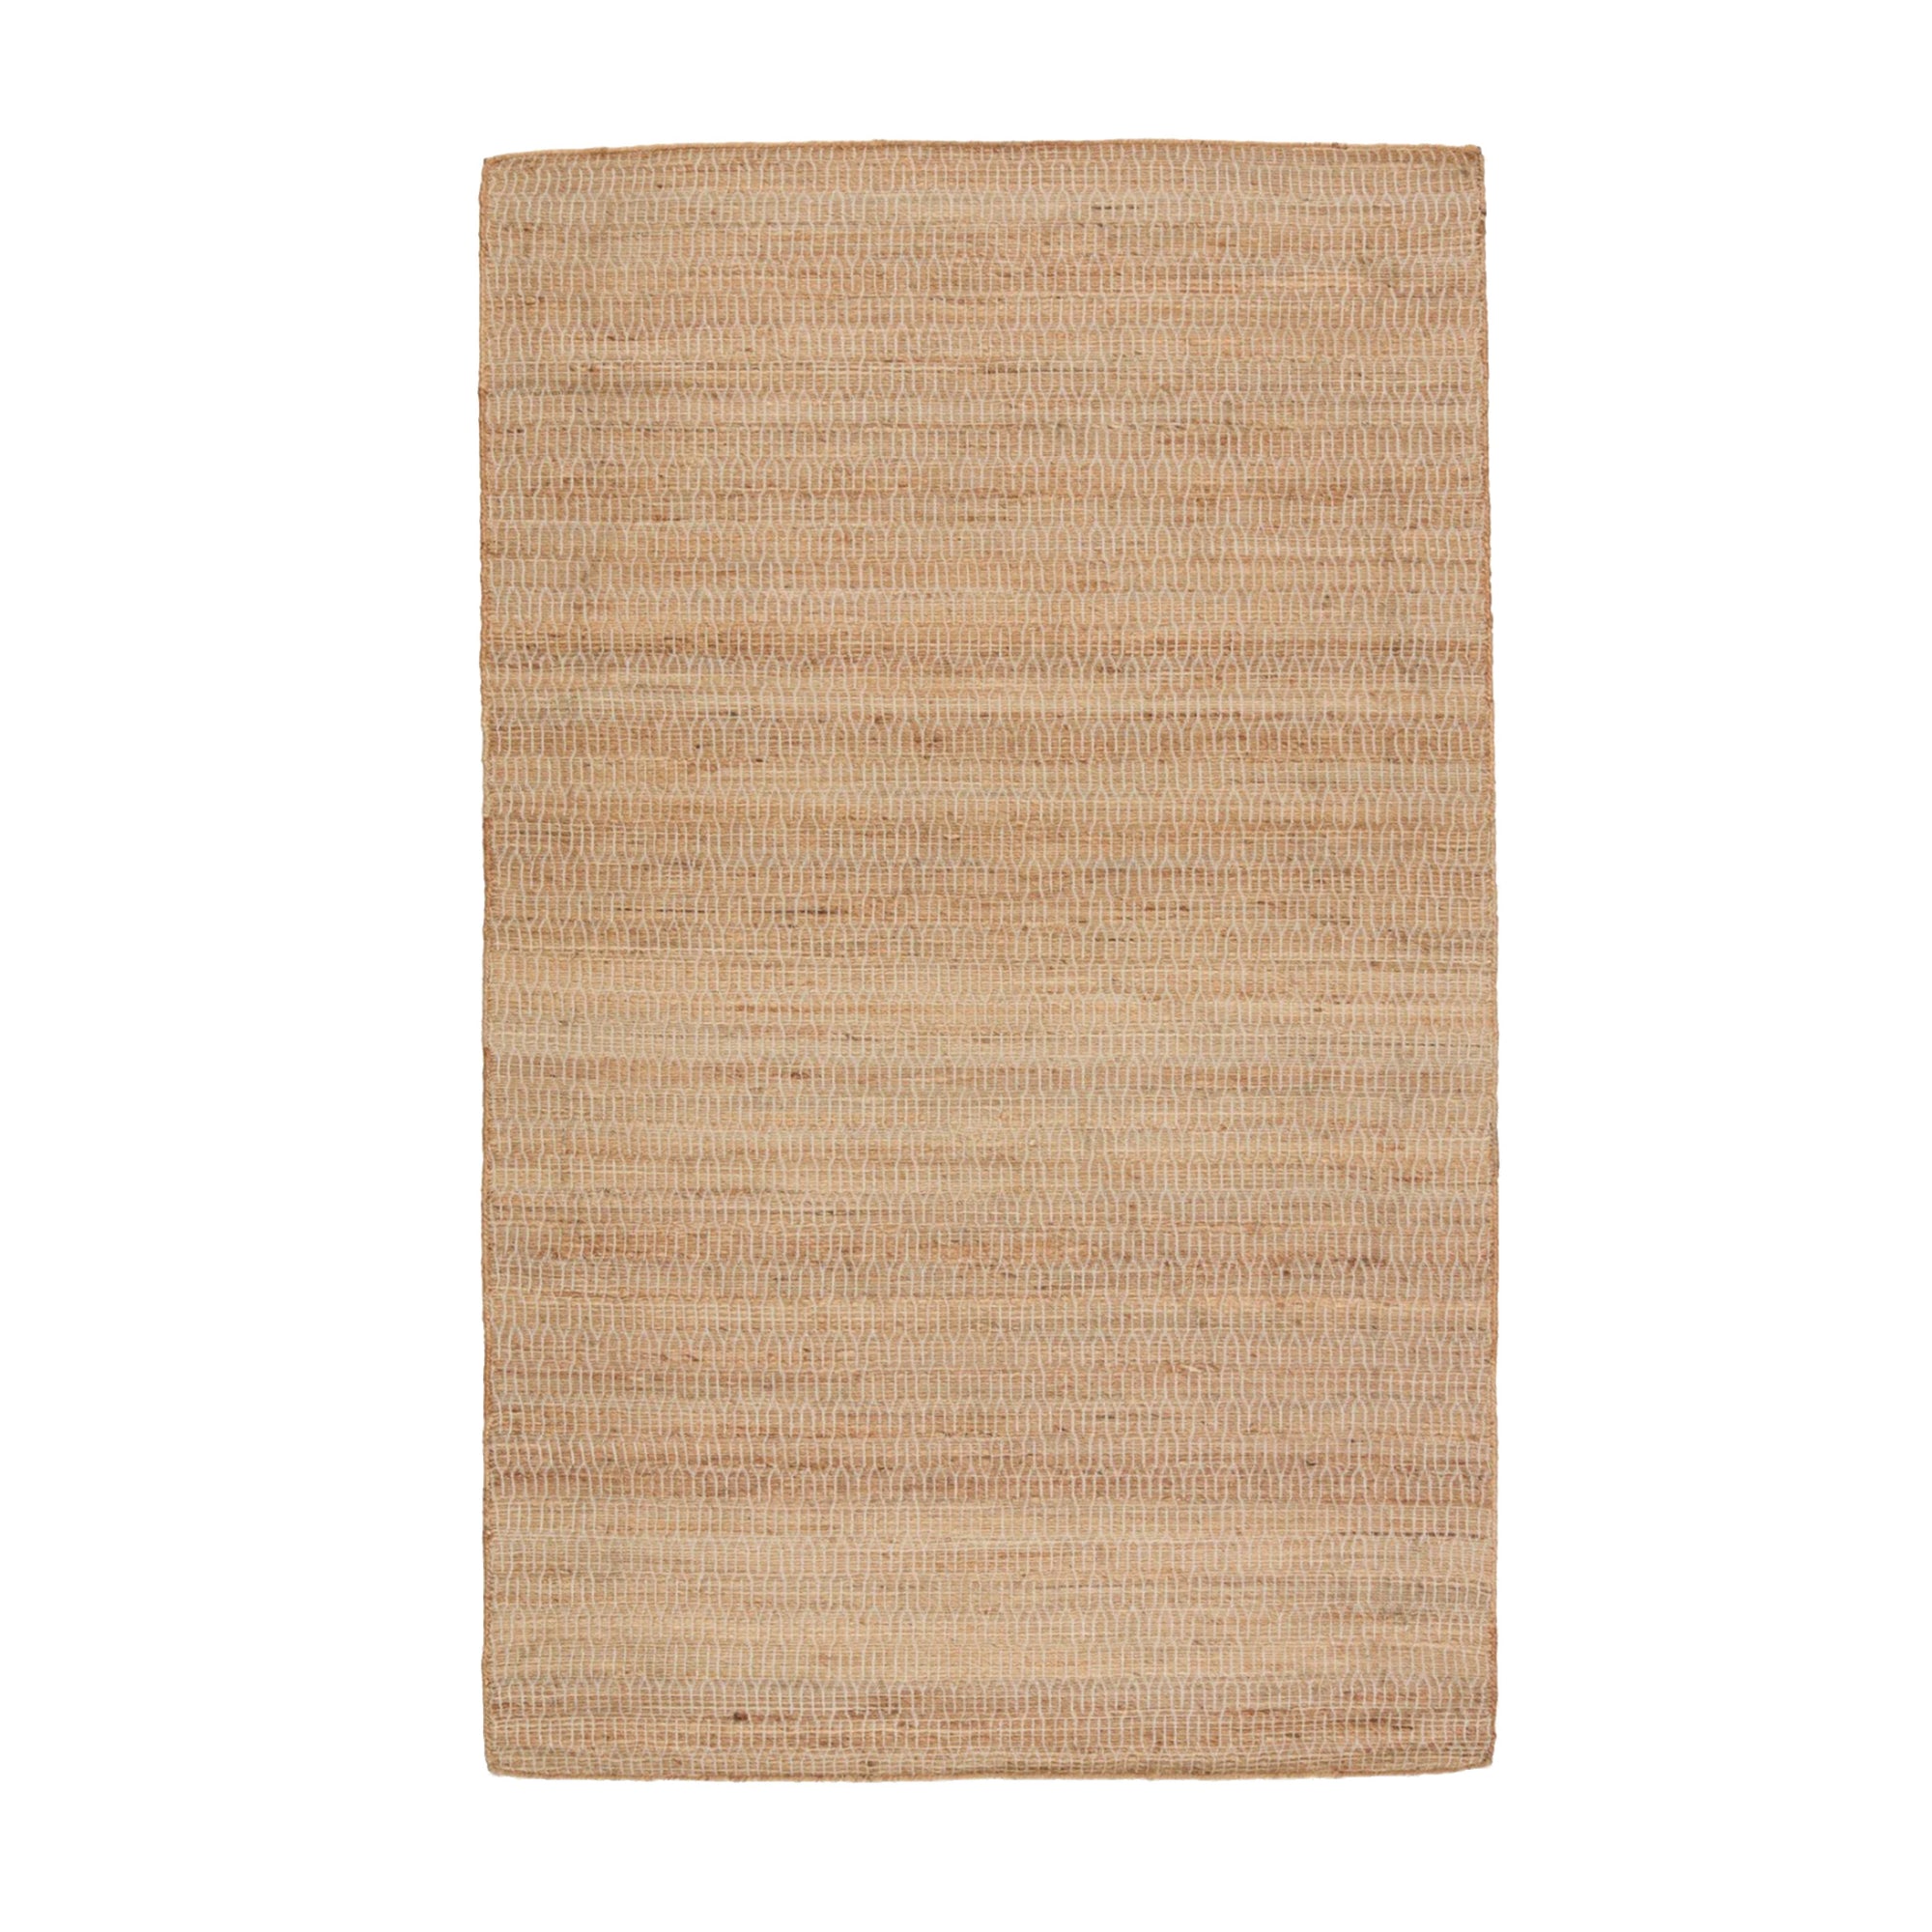 Rampart Cania Rug